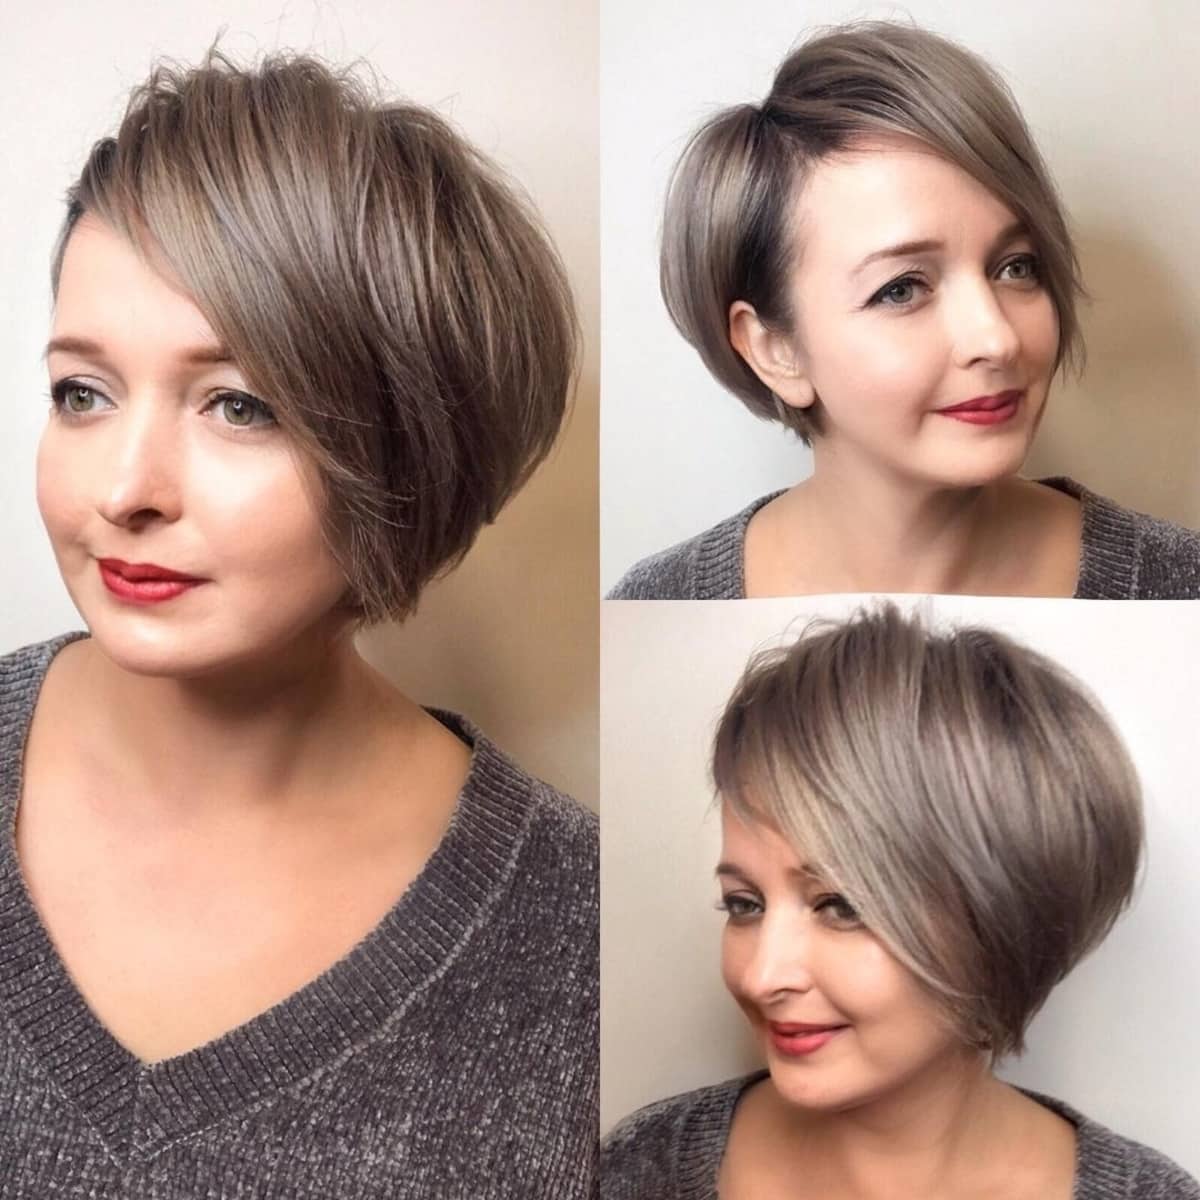 Long pixie cut for round faced women